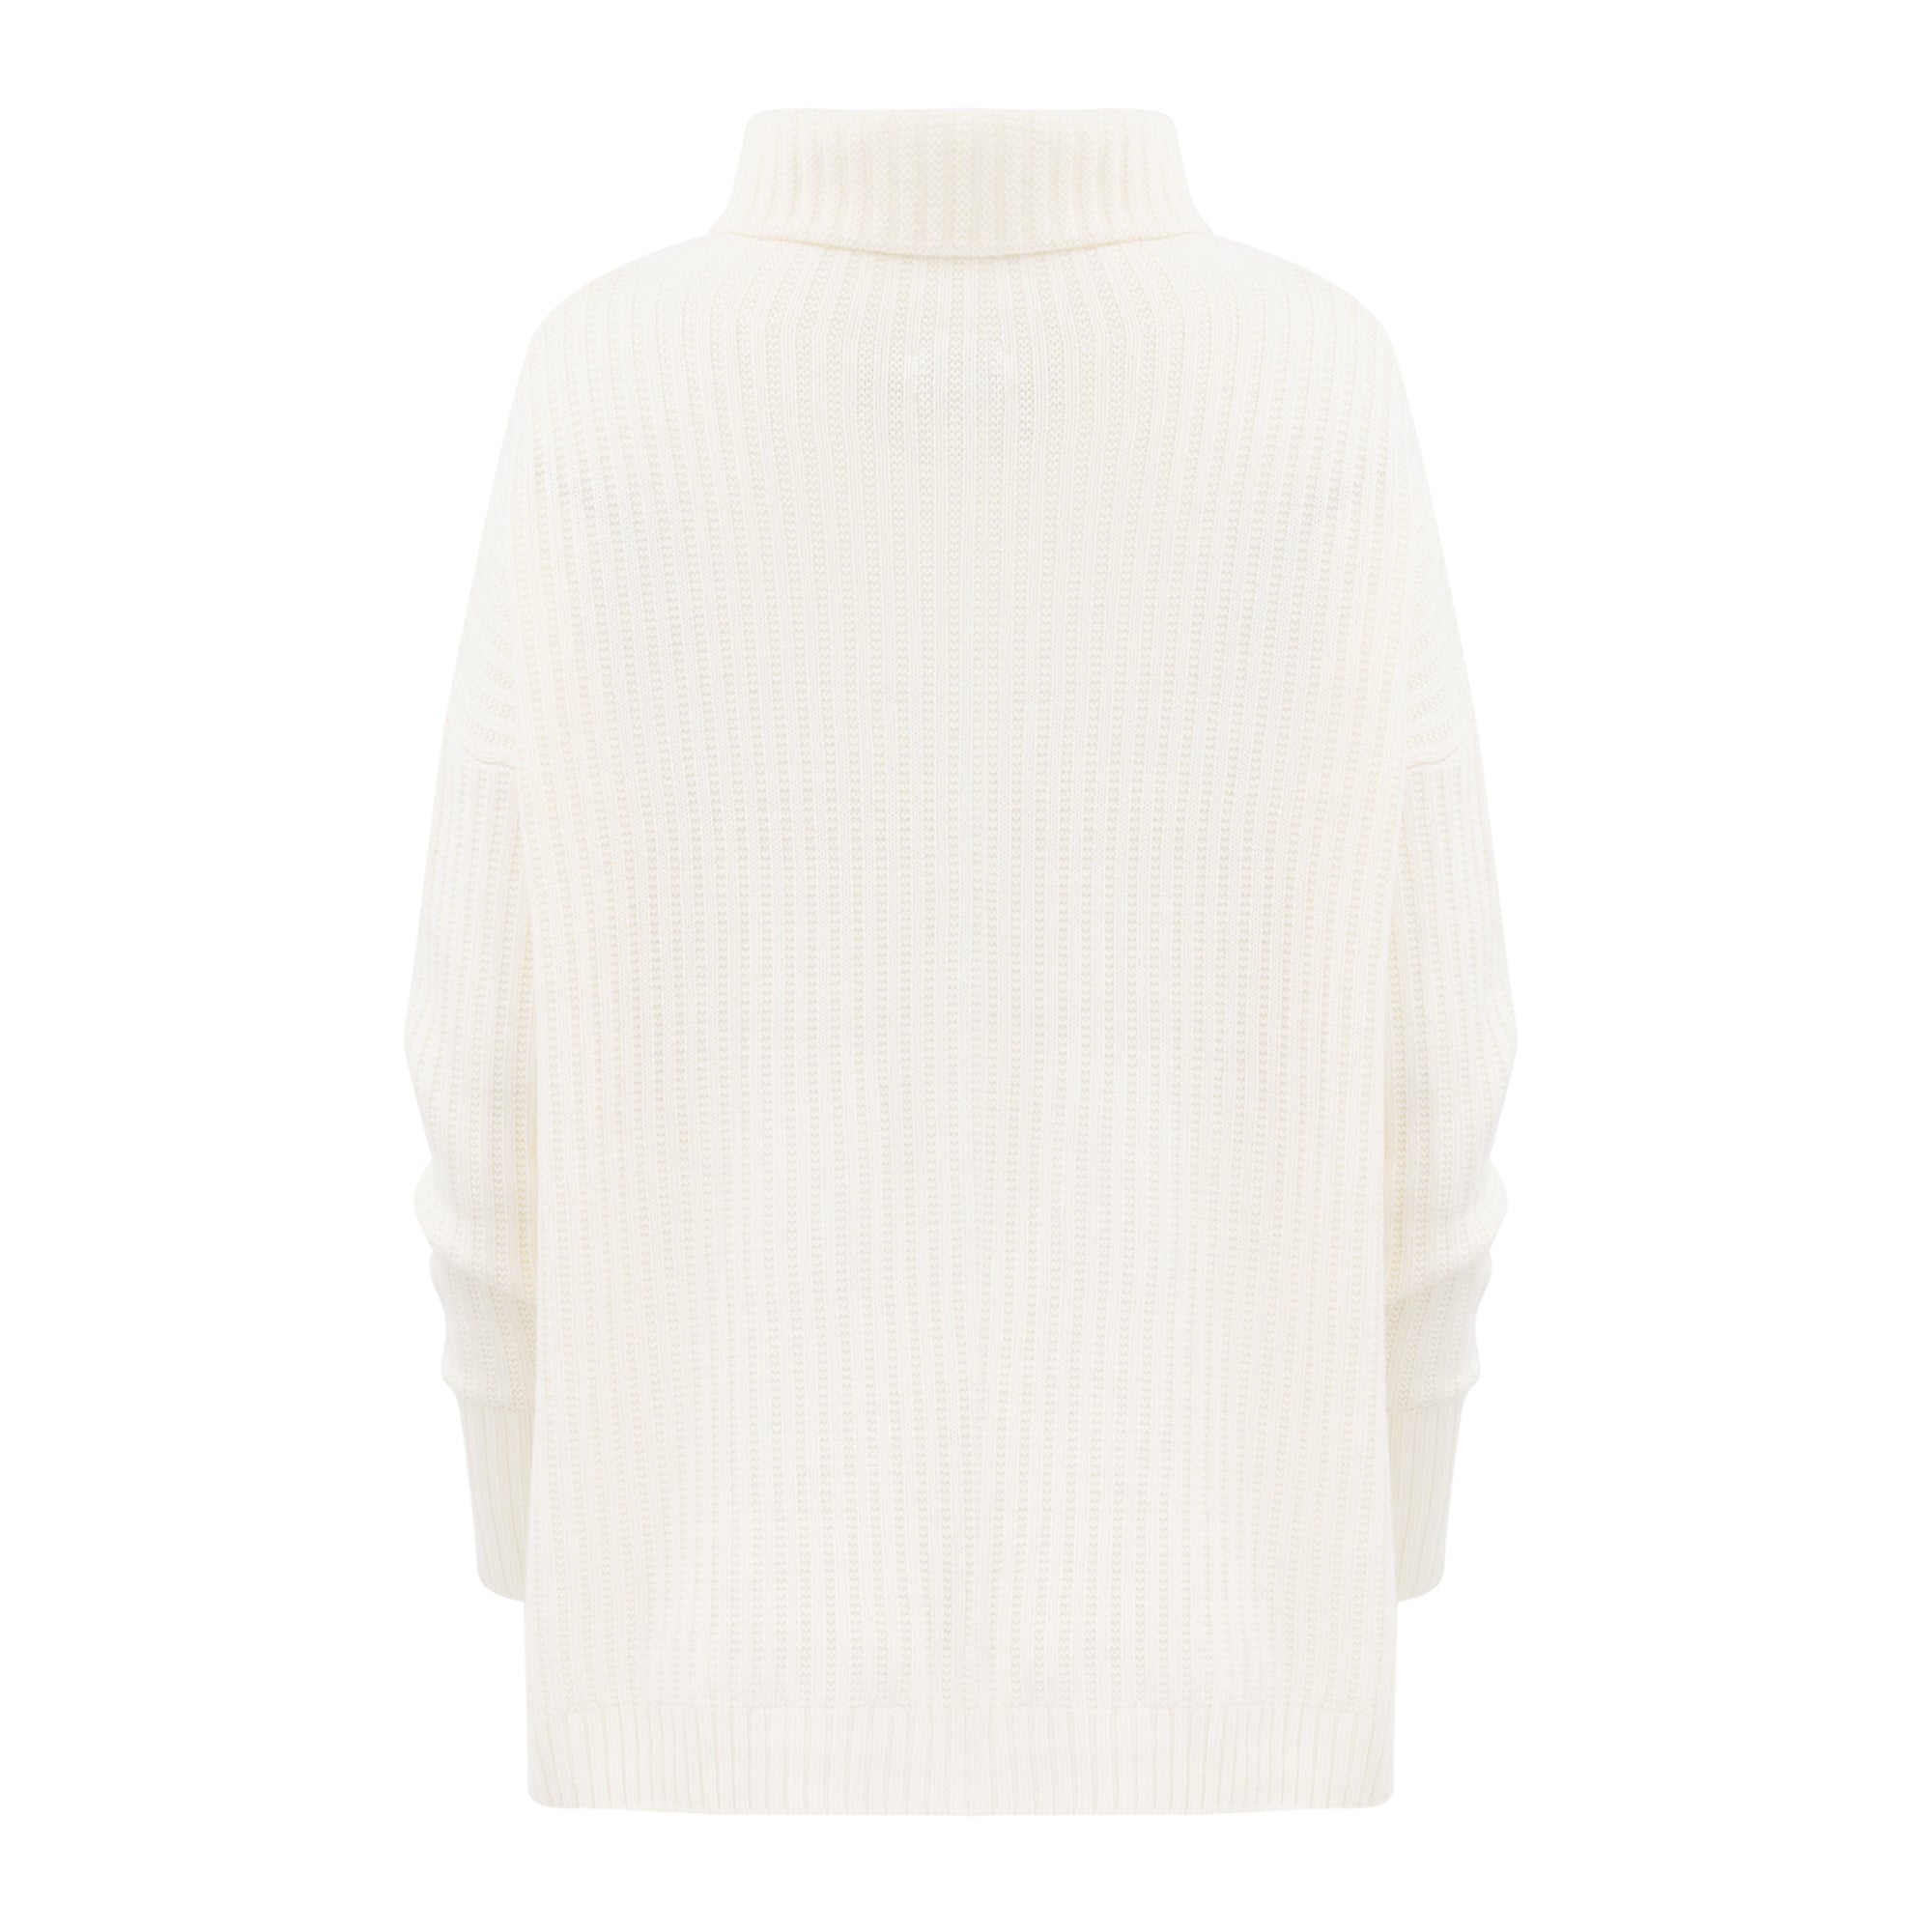 Everly Sweater - Ivory